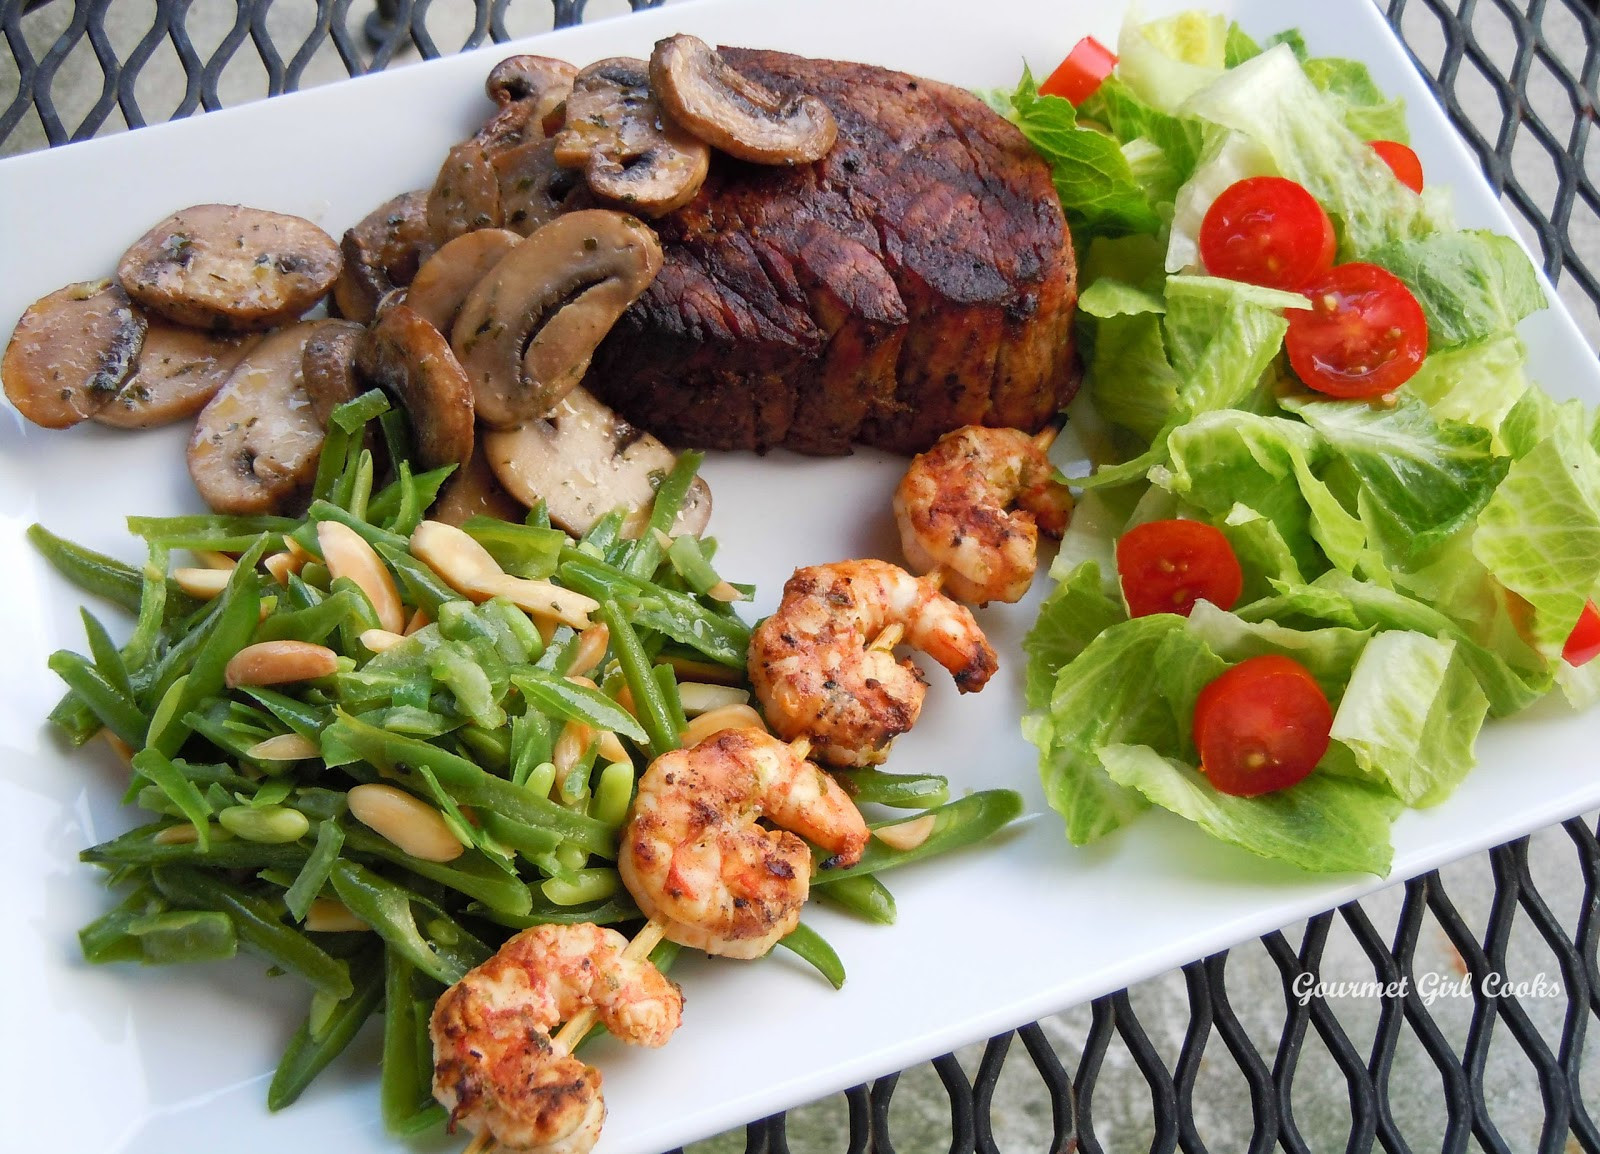 Surf And Turf Dinner Party Ideas
 Gourmet Girl Cooks Happy Father s Day Surf & Turf